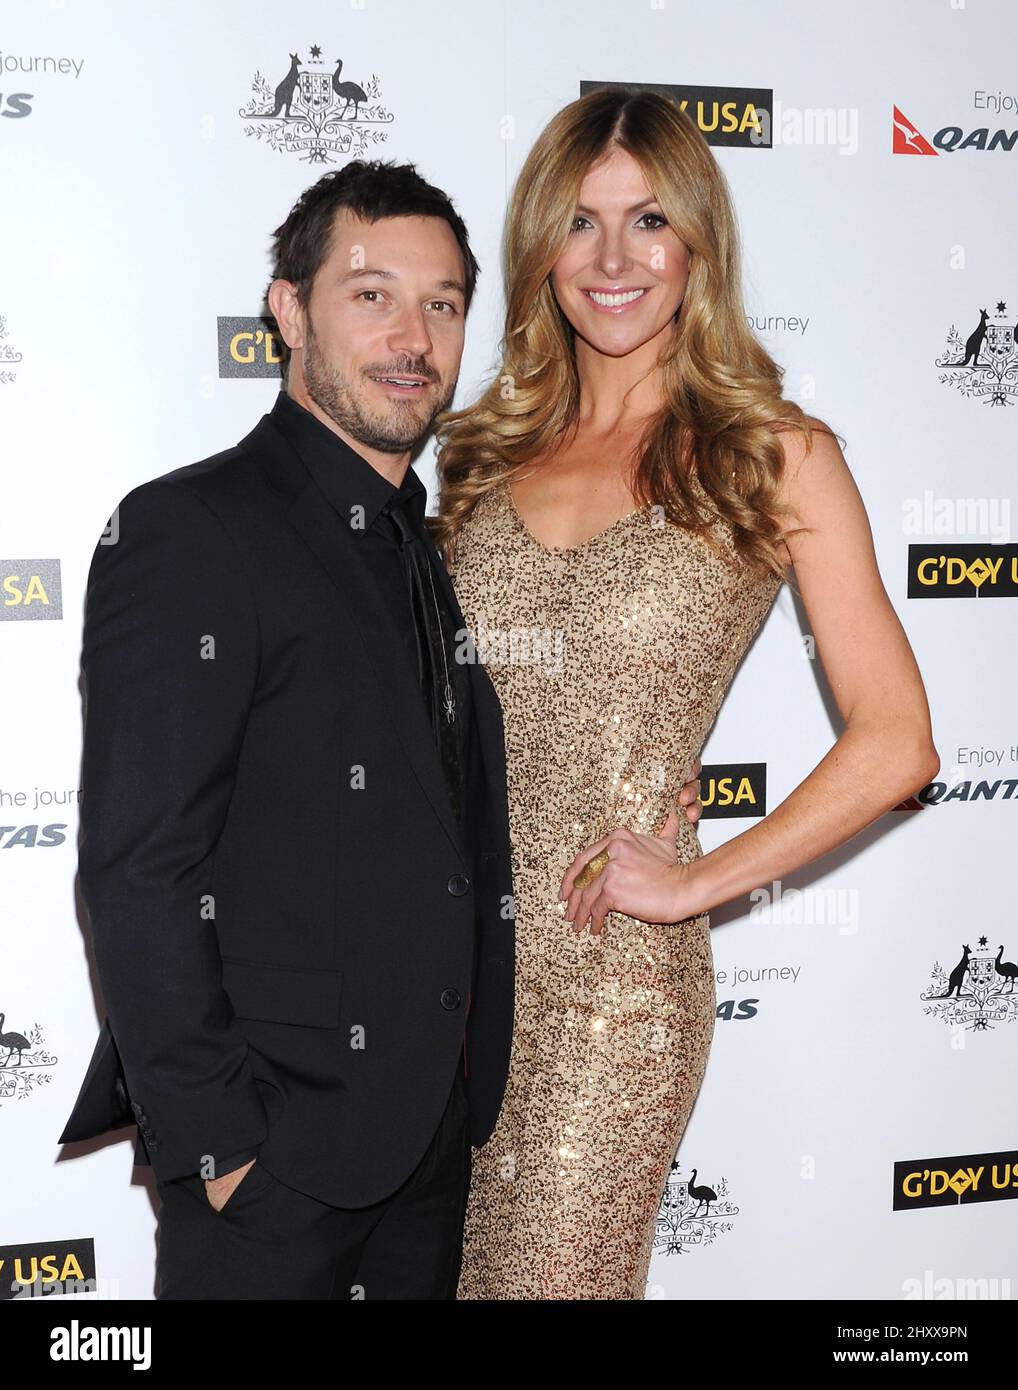 Chris Joannou and Laura Csortan at the 9th Annual G'Day USA Los Angeles Black Tie Gala held at Hollywood & Highland, Los Angeles Stock Photo